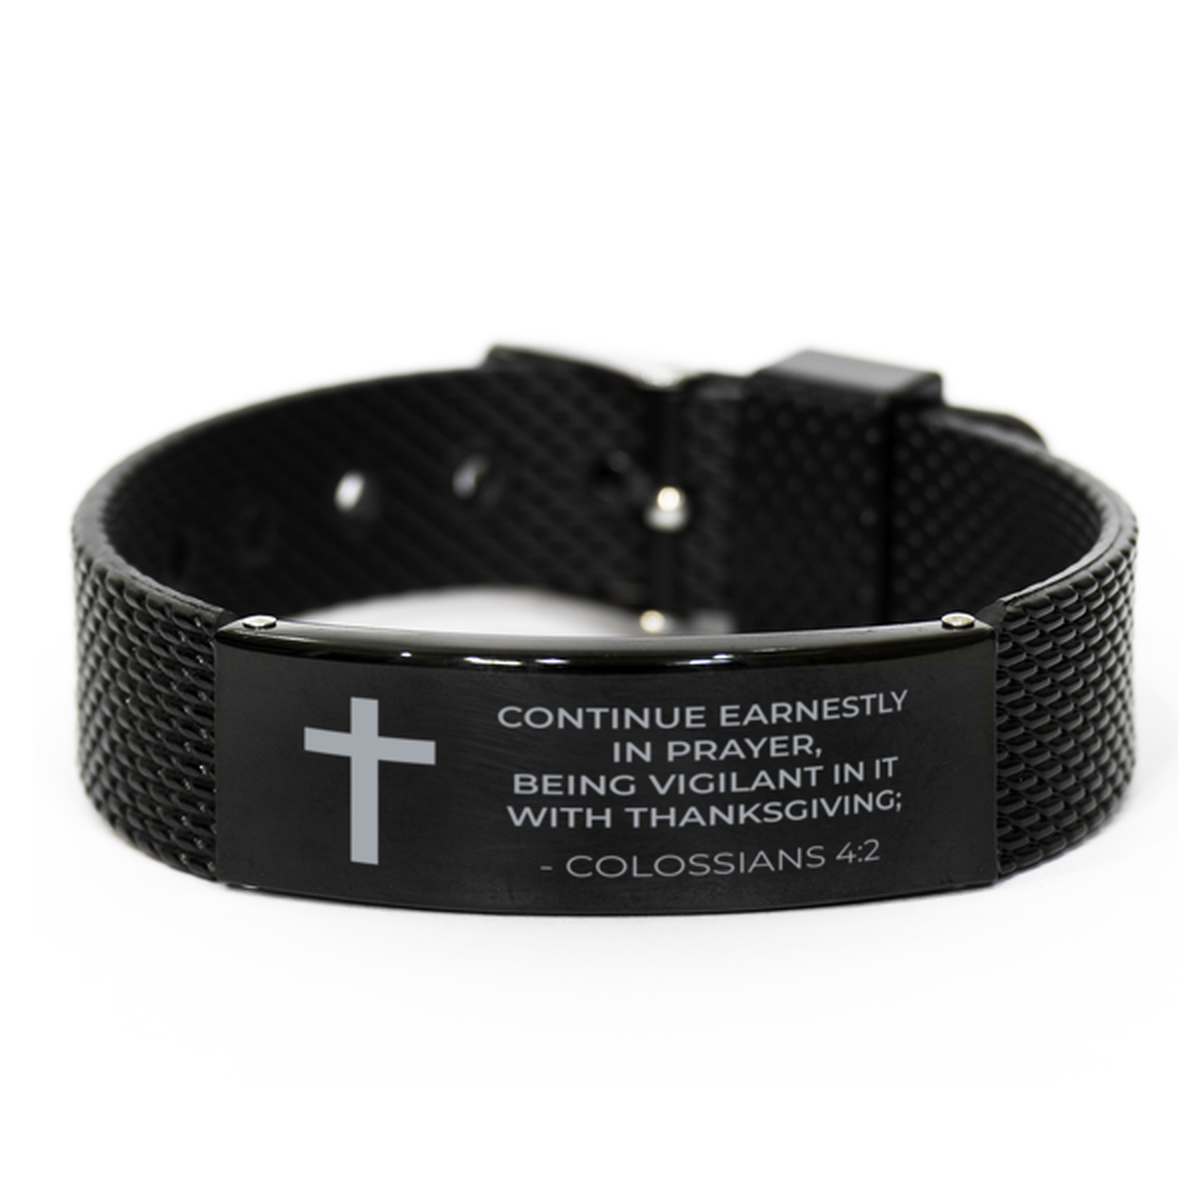 Christian Black Bracelet,, Colossians 4:2 Continue Earnestly In Prayer, Being Vigilant In, Motivational Bible Verse Gifts For Men Women